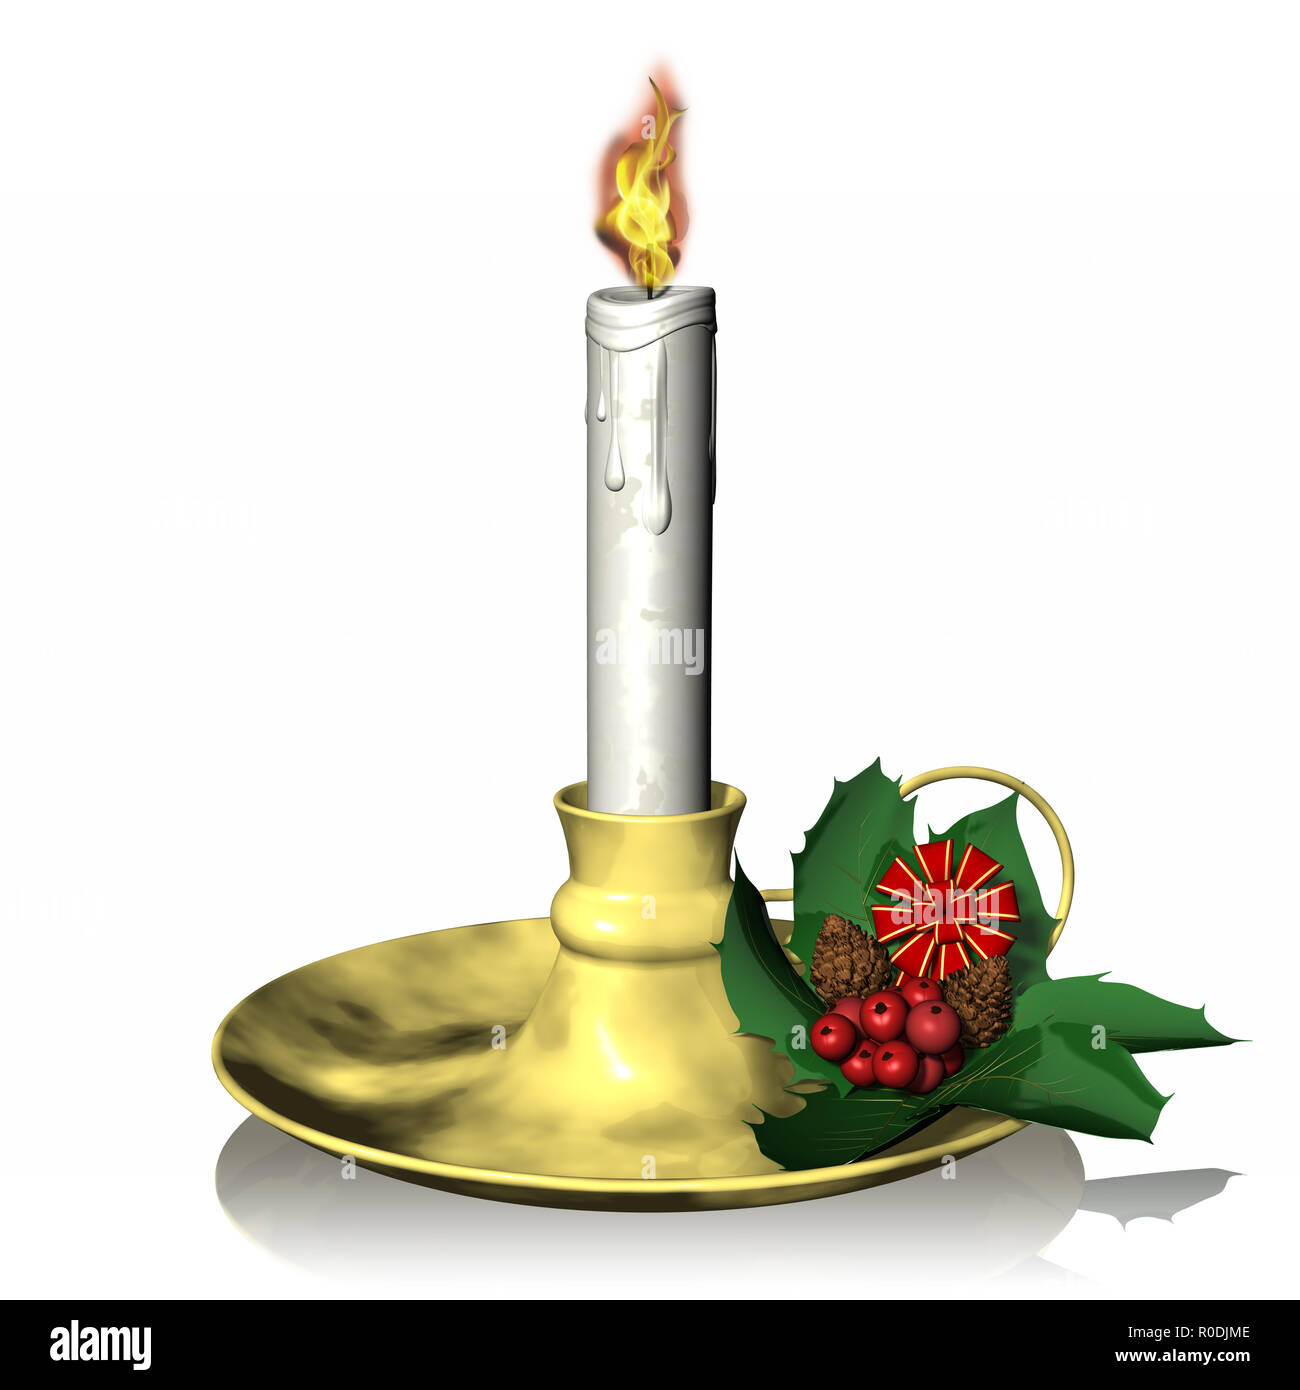 3D illustration. Christmas. Candle with Christmas decoration. white background. Stock Photo